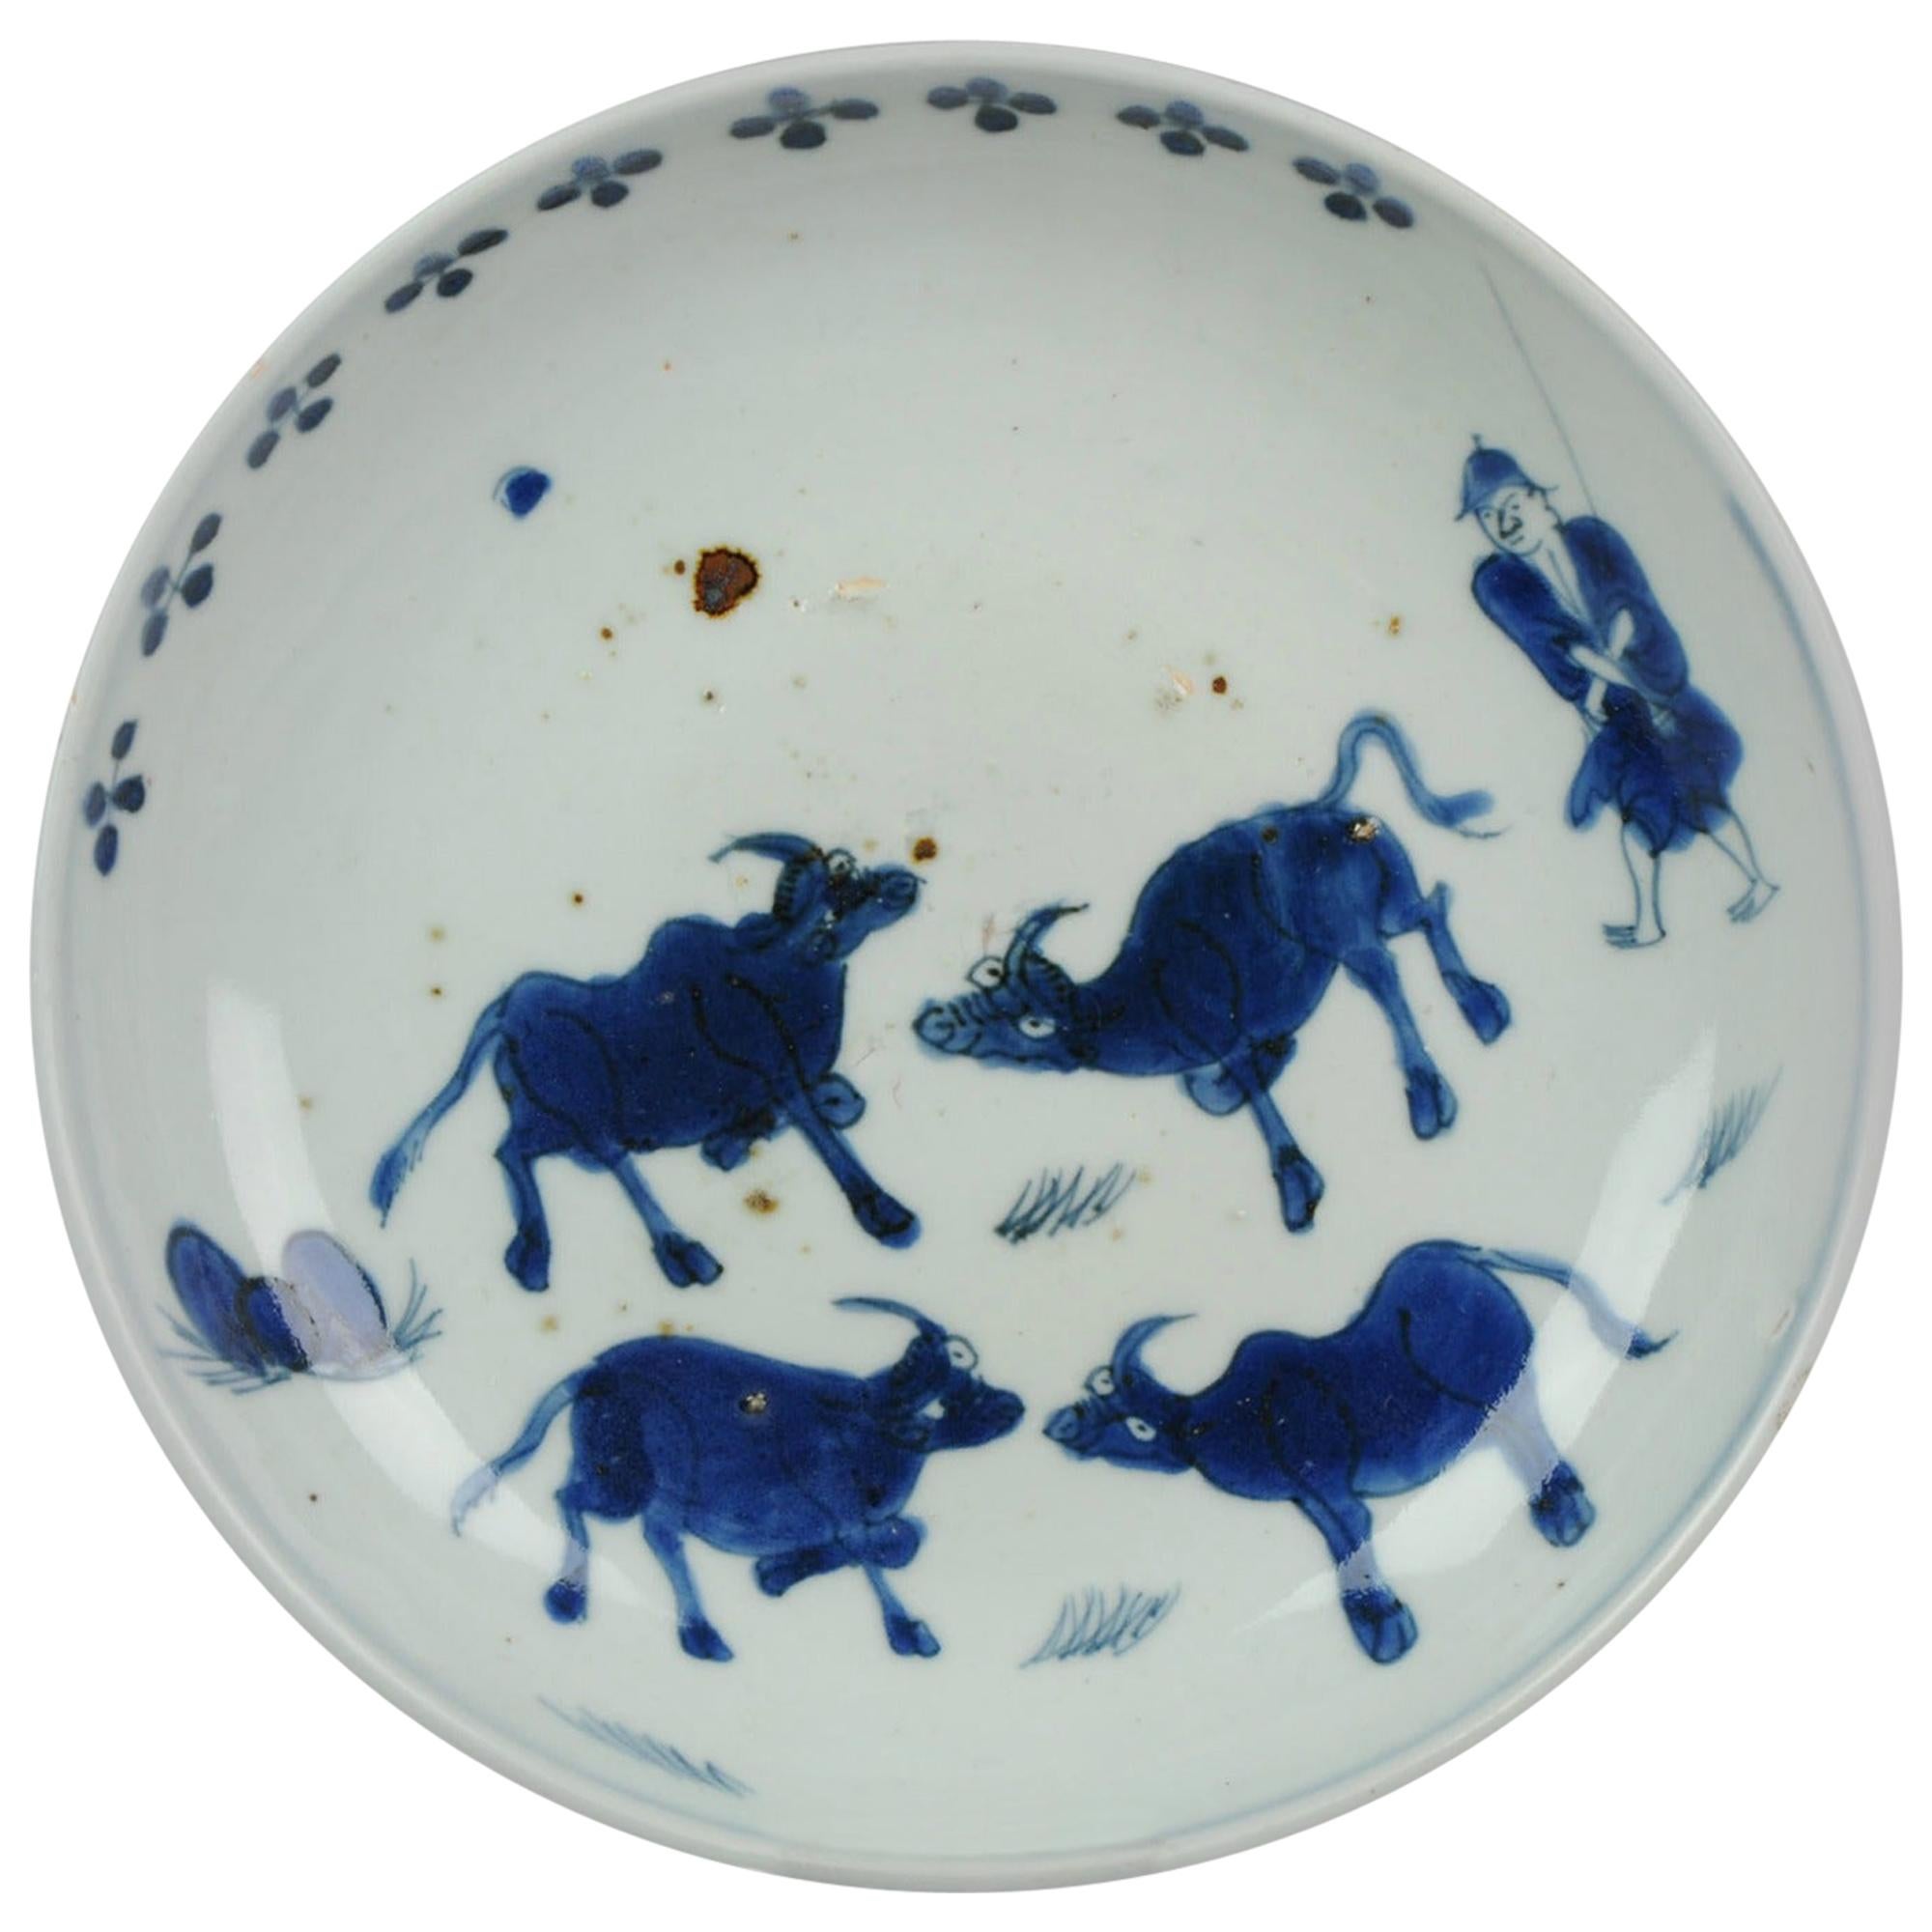 Antique Chinese circa 1600-1640 C Porcelain China Plate Cows and Shepperd For Sale